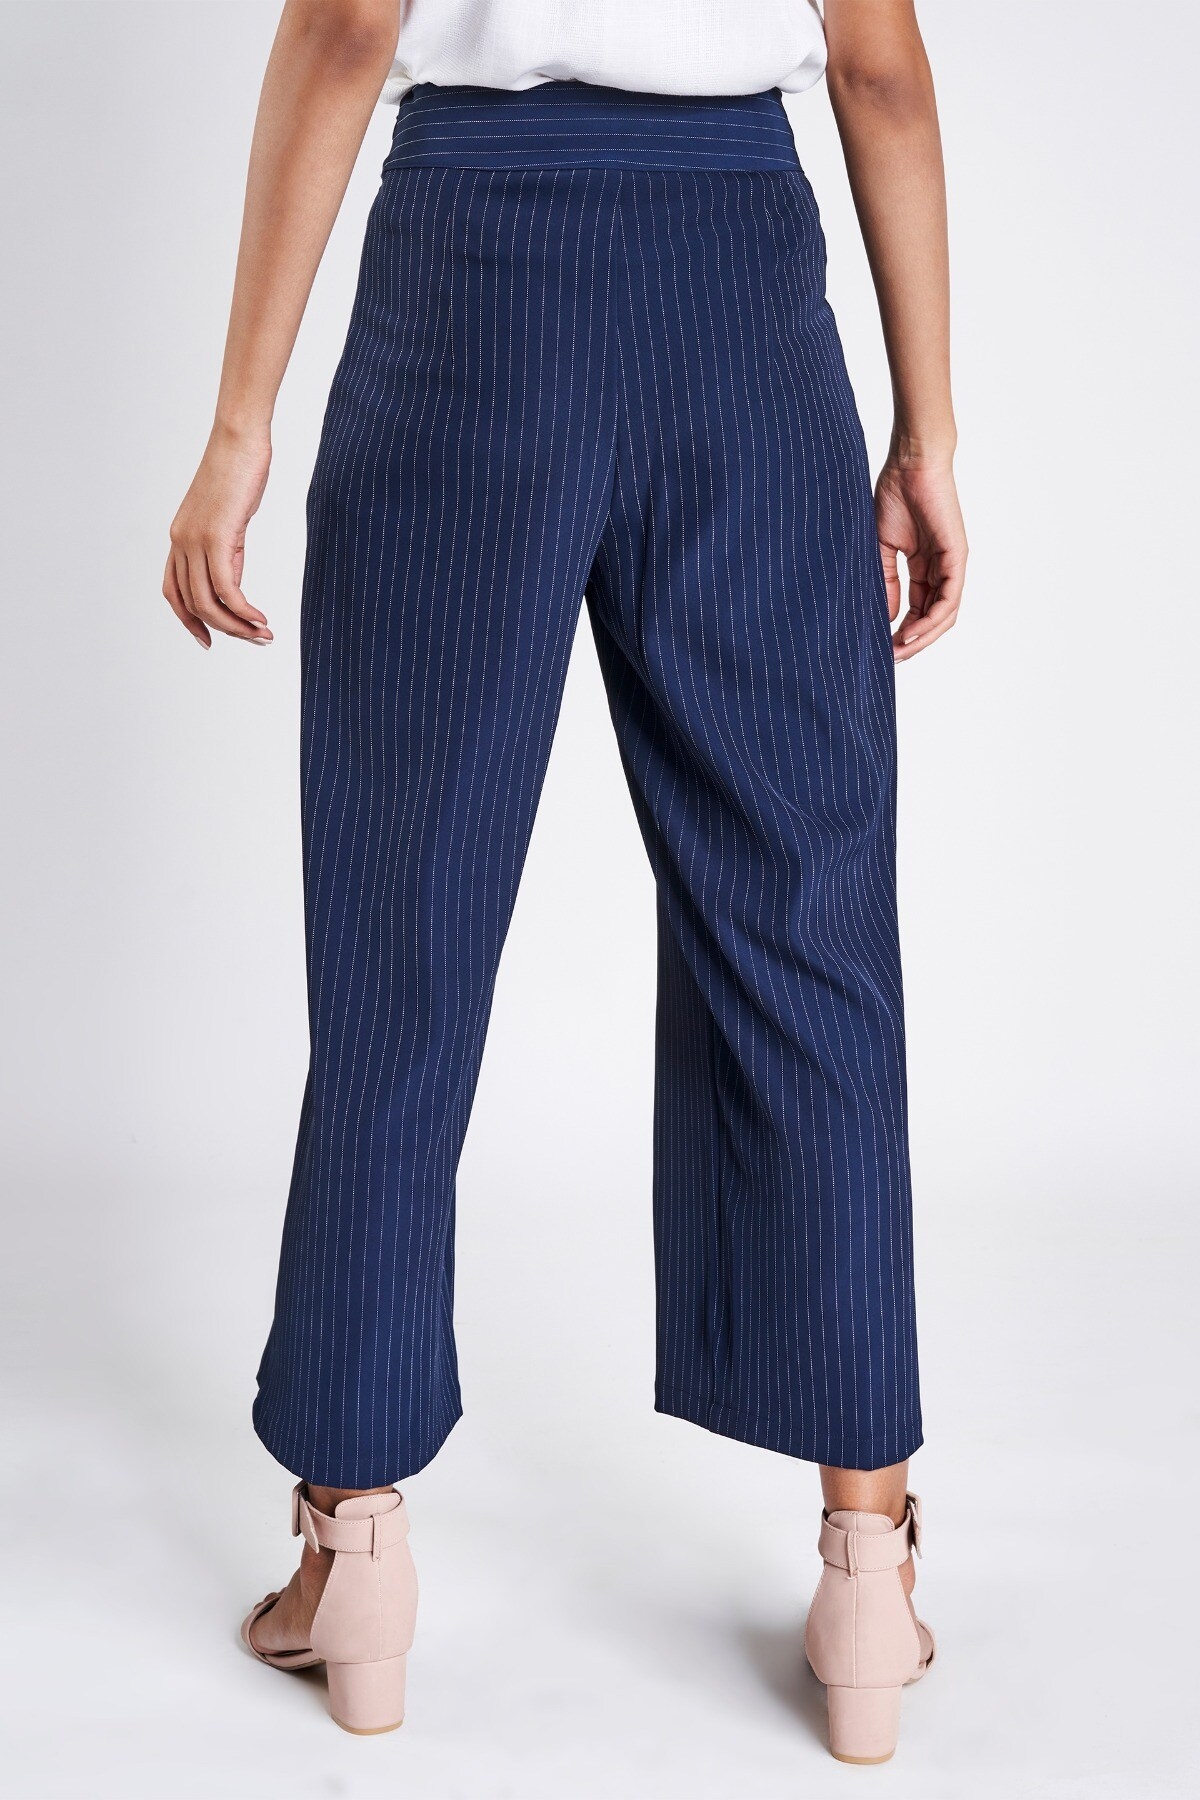 AND | Navy Blue Striped Bottom